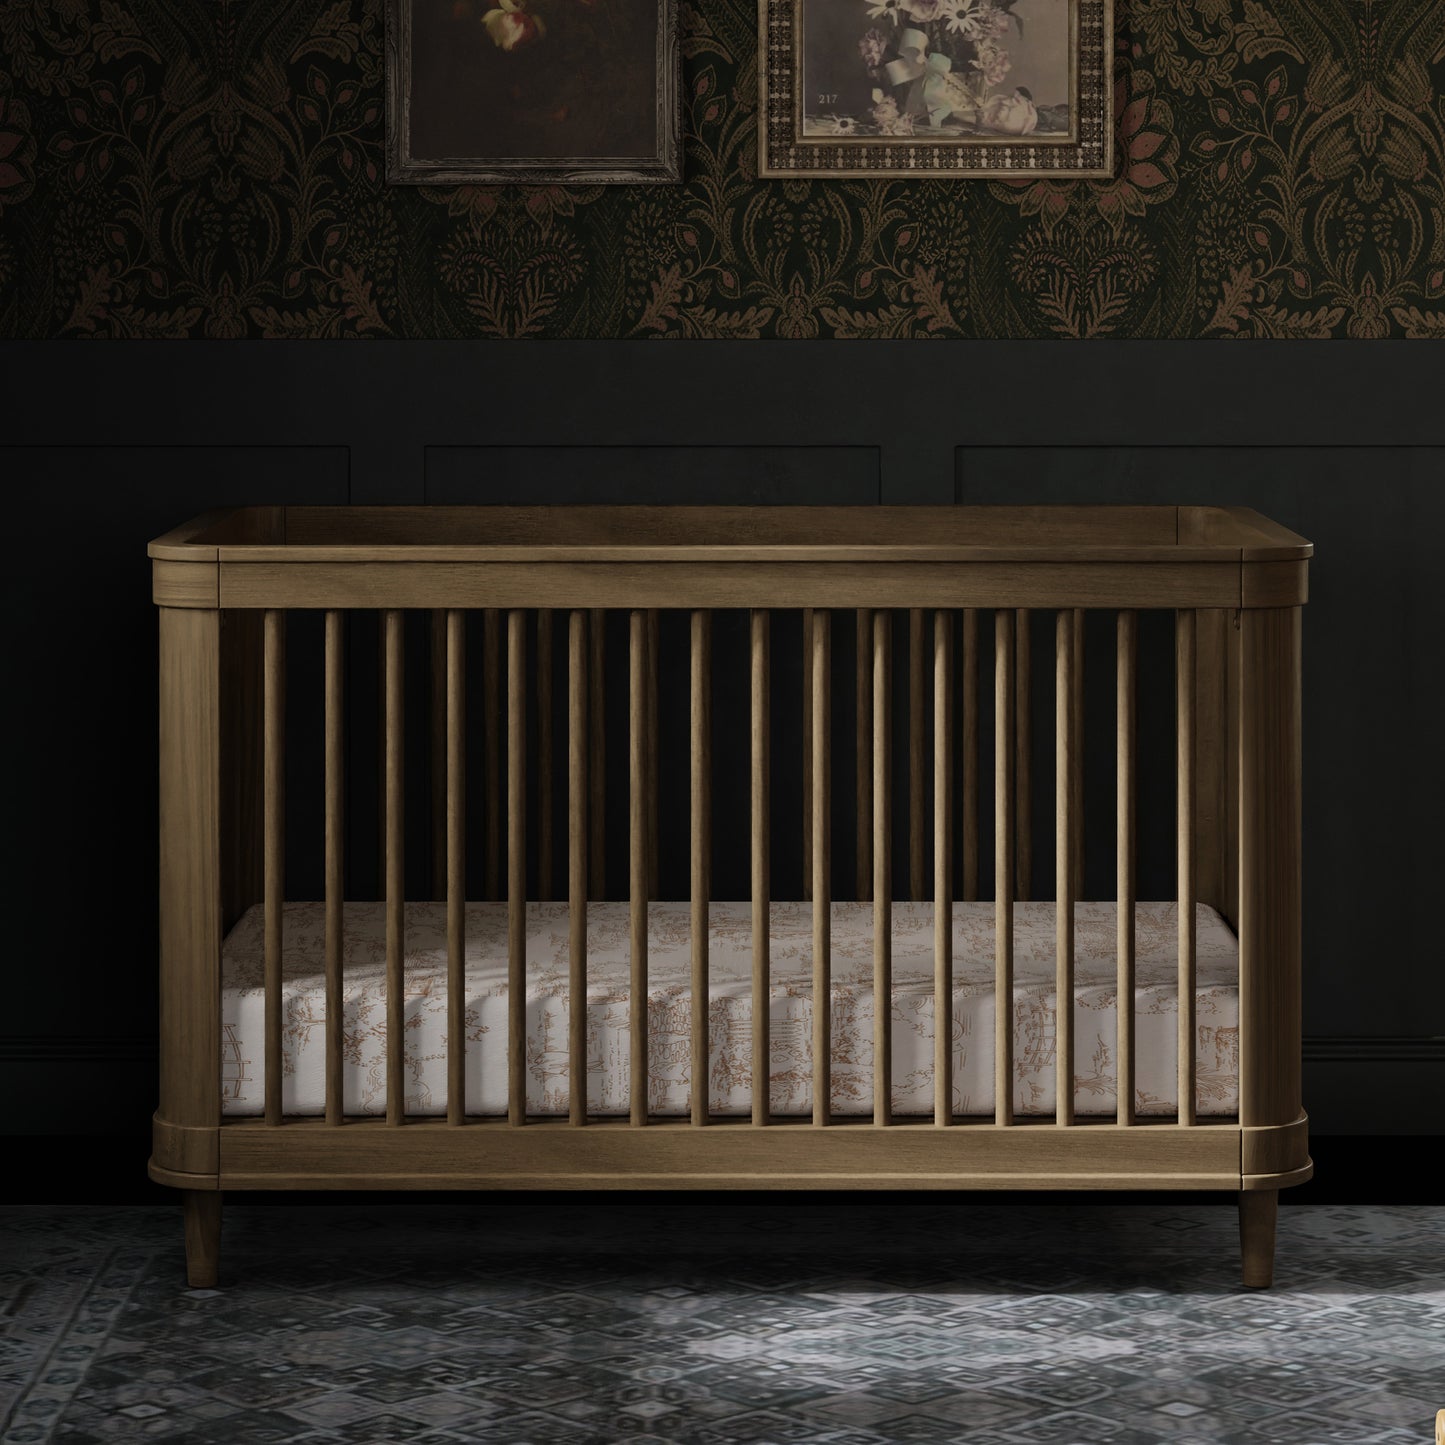 M23701NLBC,Marin with Cane 3-in-1 Convertible Crib in Natural Walnut and Blonde Cane